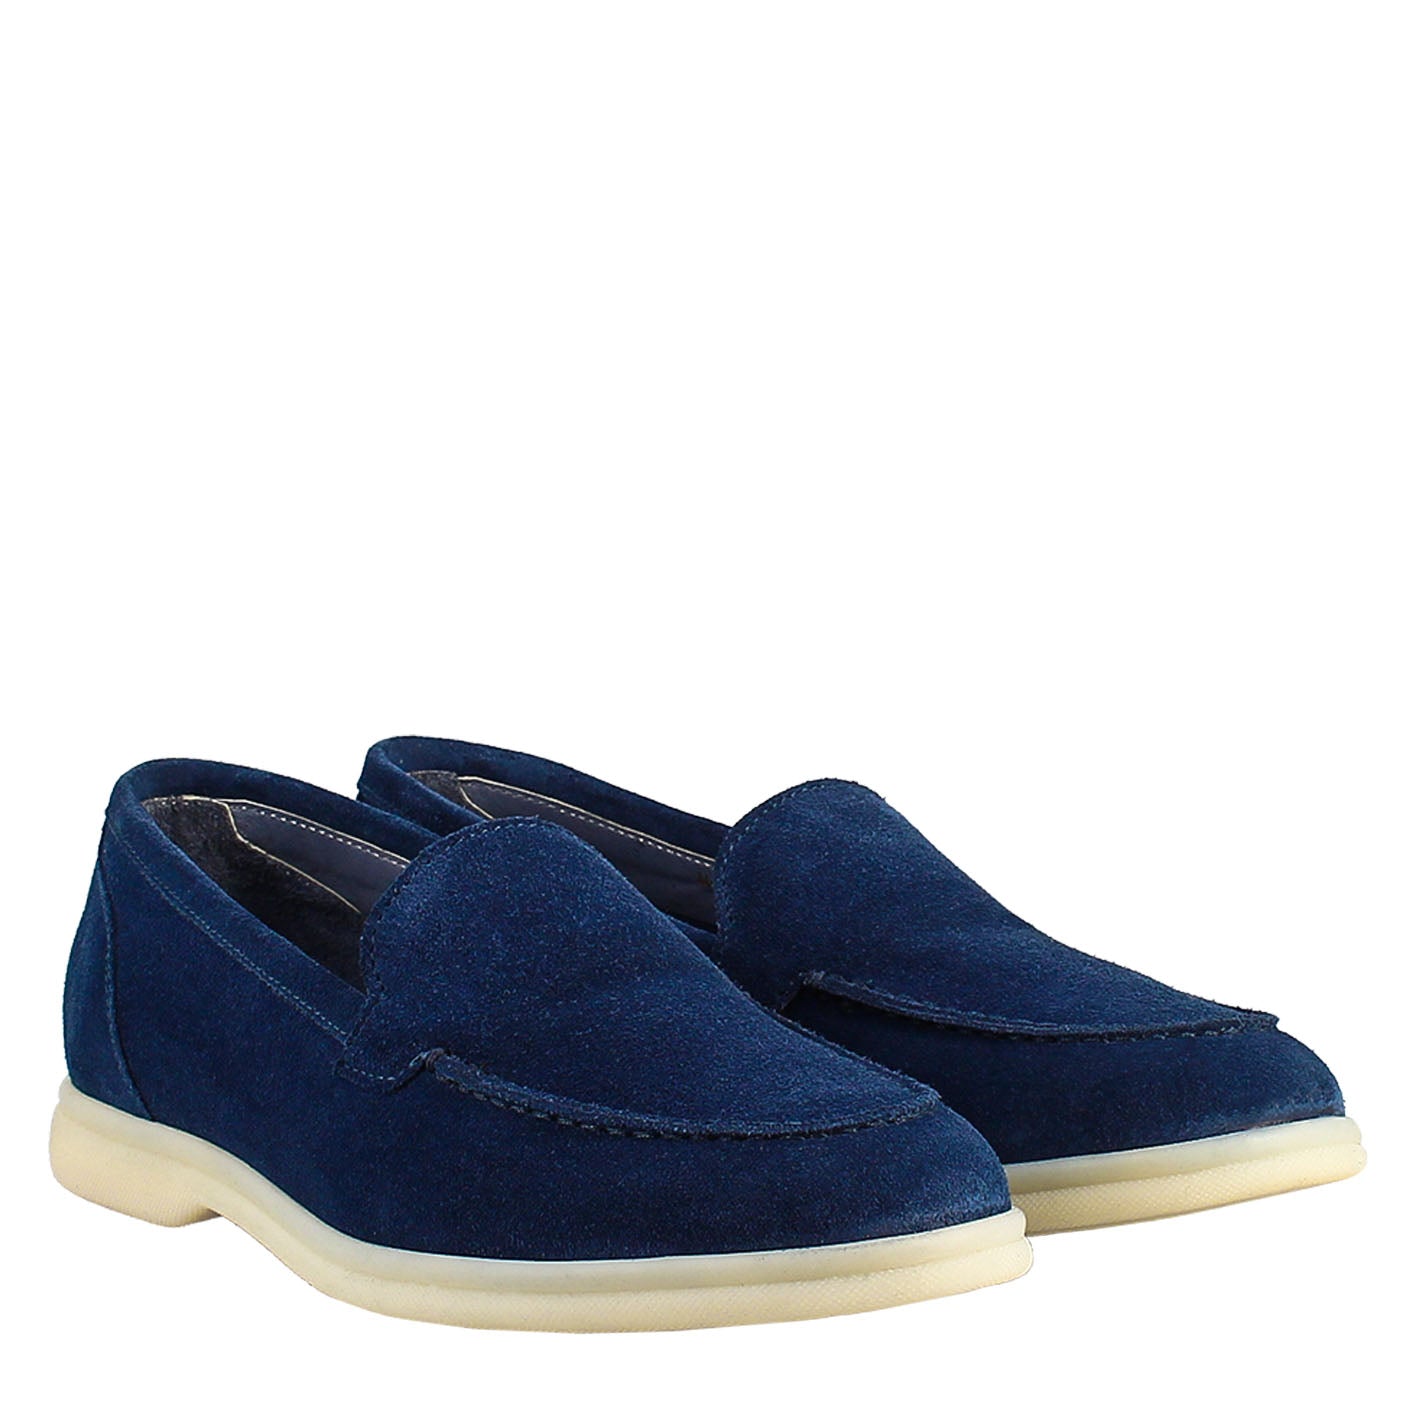 Women's flexible moccasin in blue suede leather